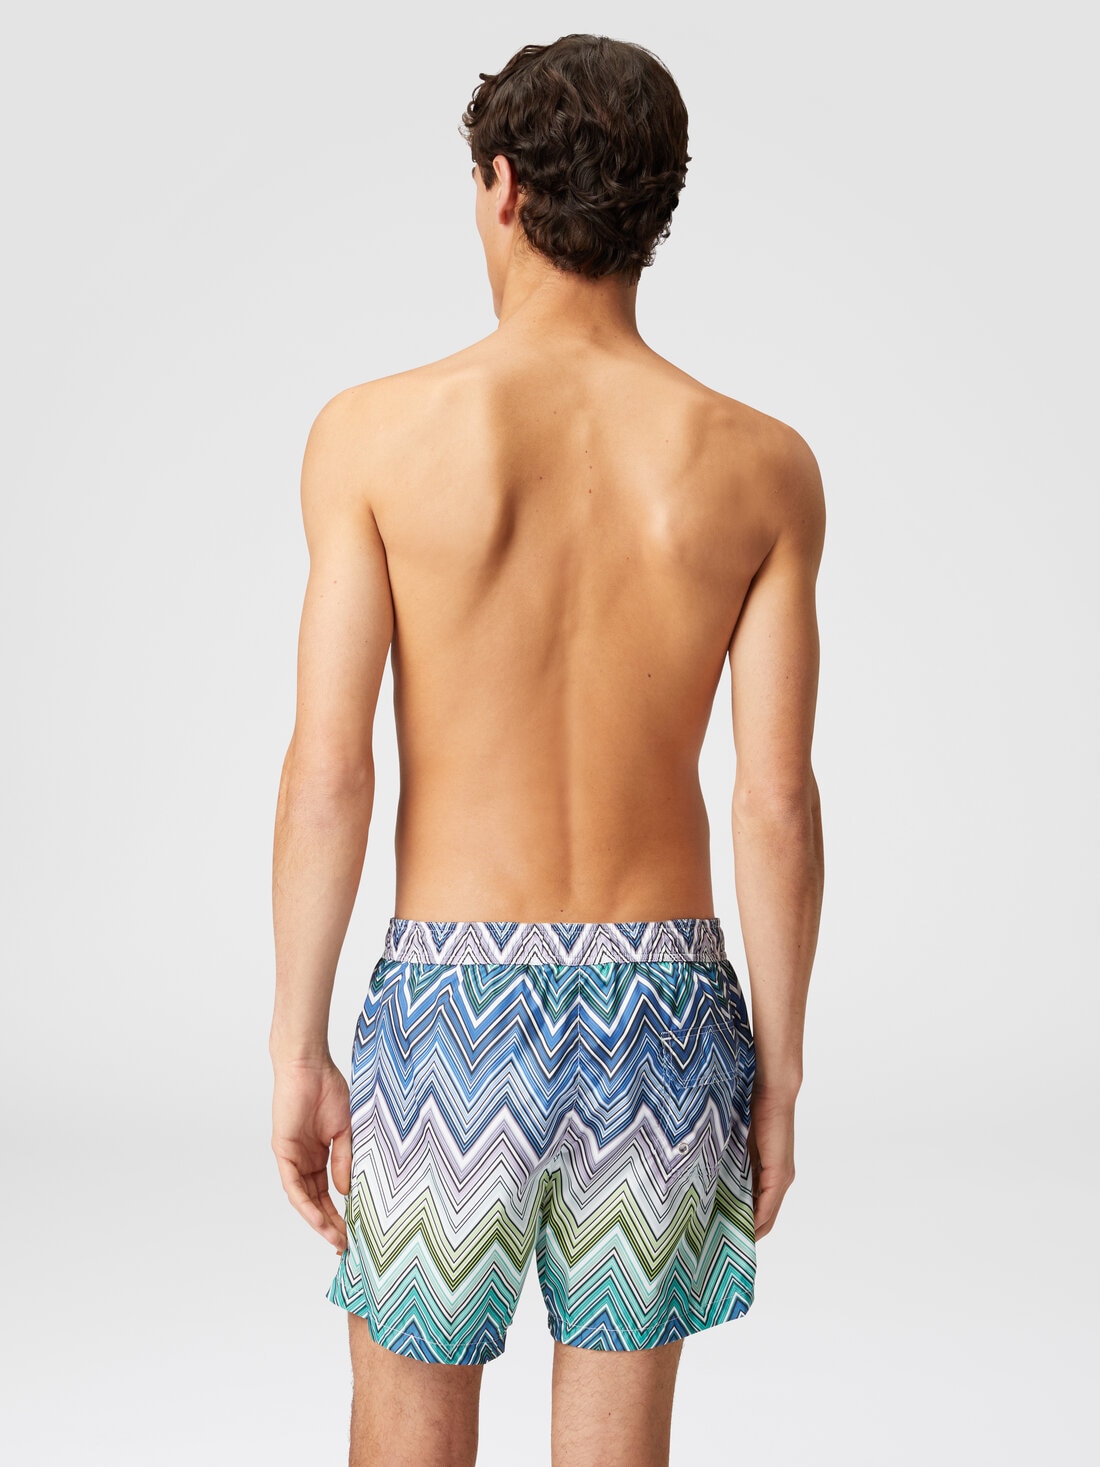 Swimming trunks with large zigzag print, Multicoloured  - US24SP00BW00S3SM992 - 2